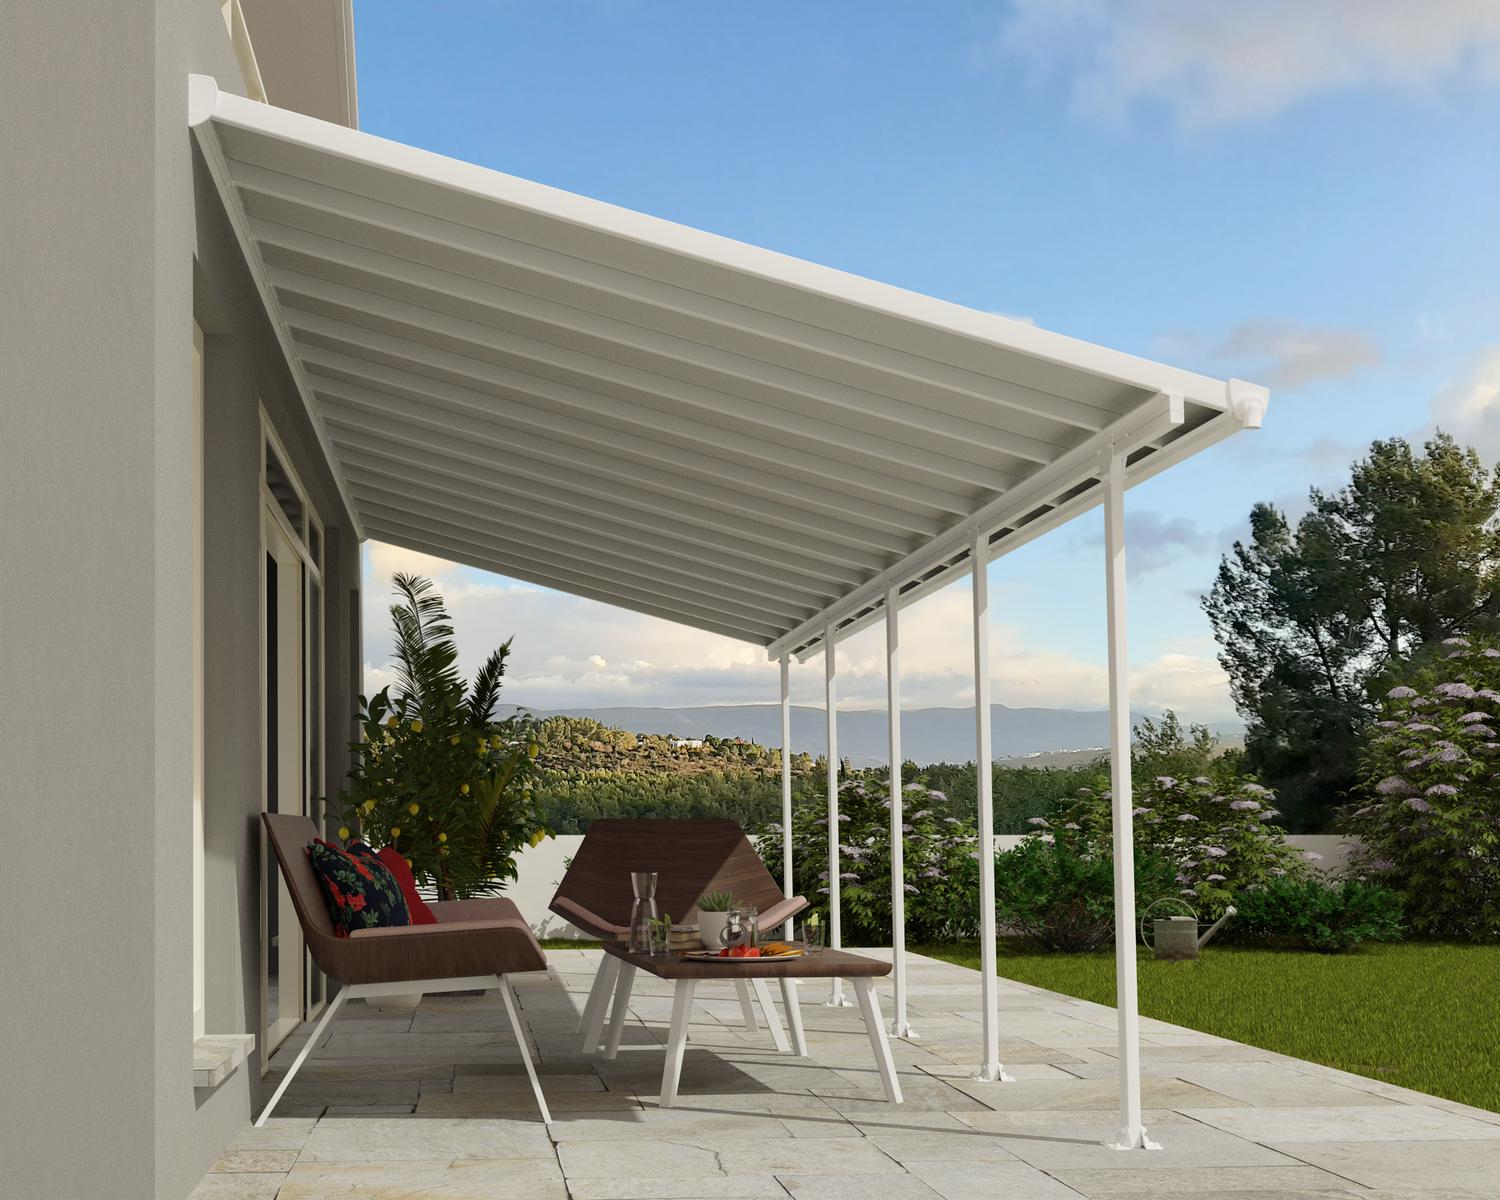 Aluminium White Patio Cover 10 ft. x 28 ft. With Polycarbonate Roof Panels, Used to Cover Outdoor Furniture